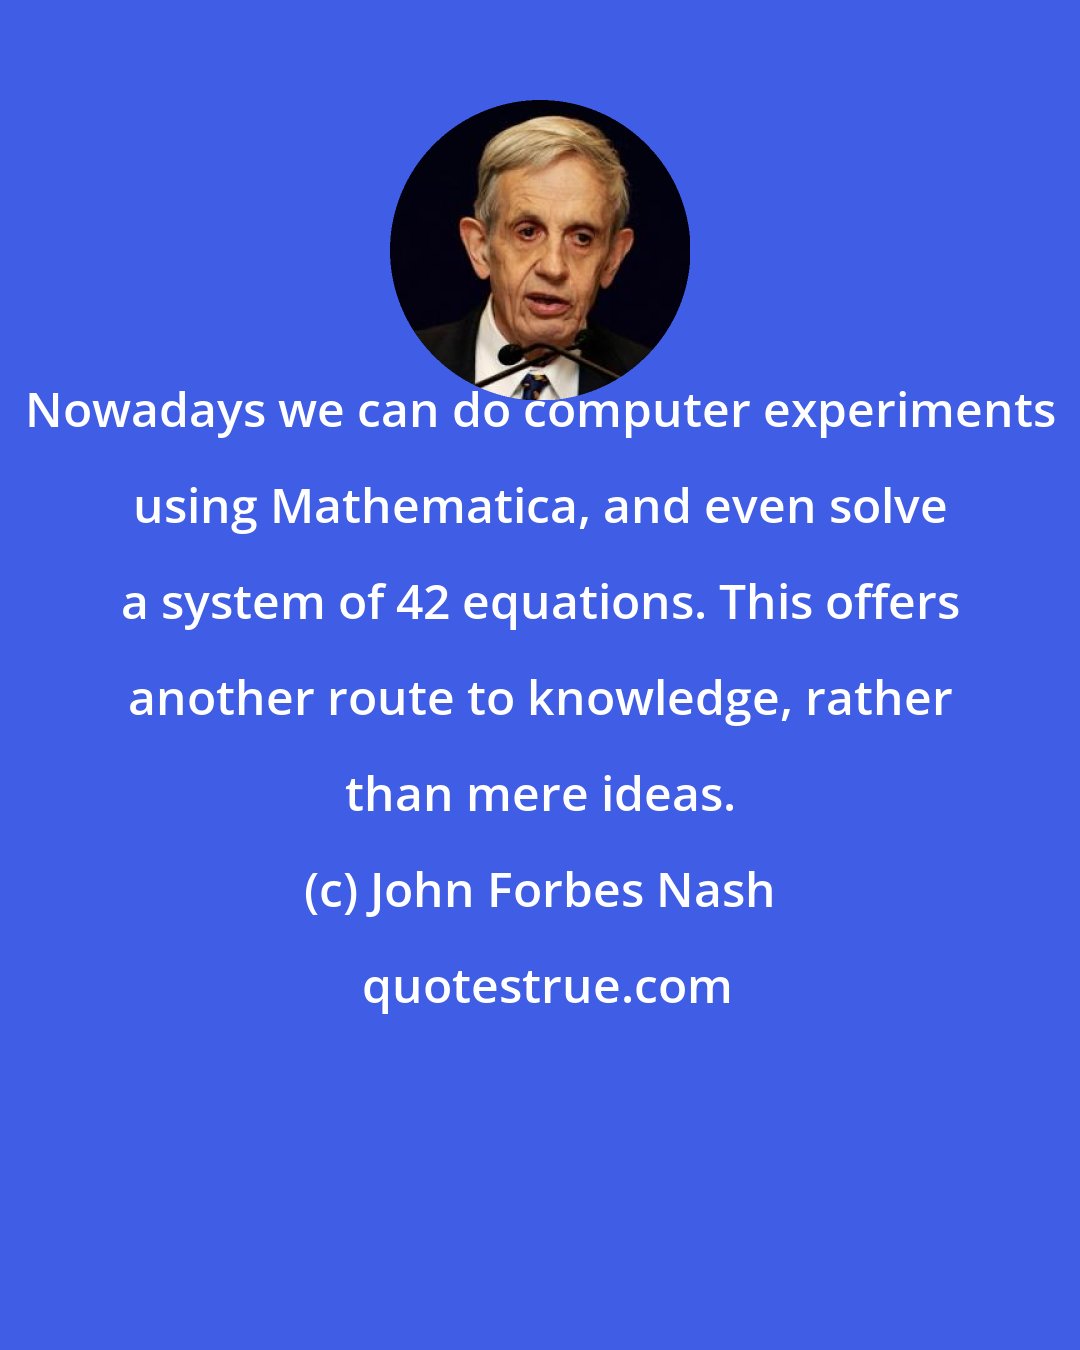 John Forbes Nash: Nowadays we can do computer experiments using Mathematica, and even solve a system of 42 equations. This offers another route to knowledge, rather than mere ideas.